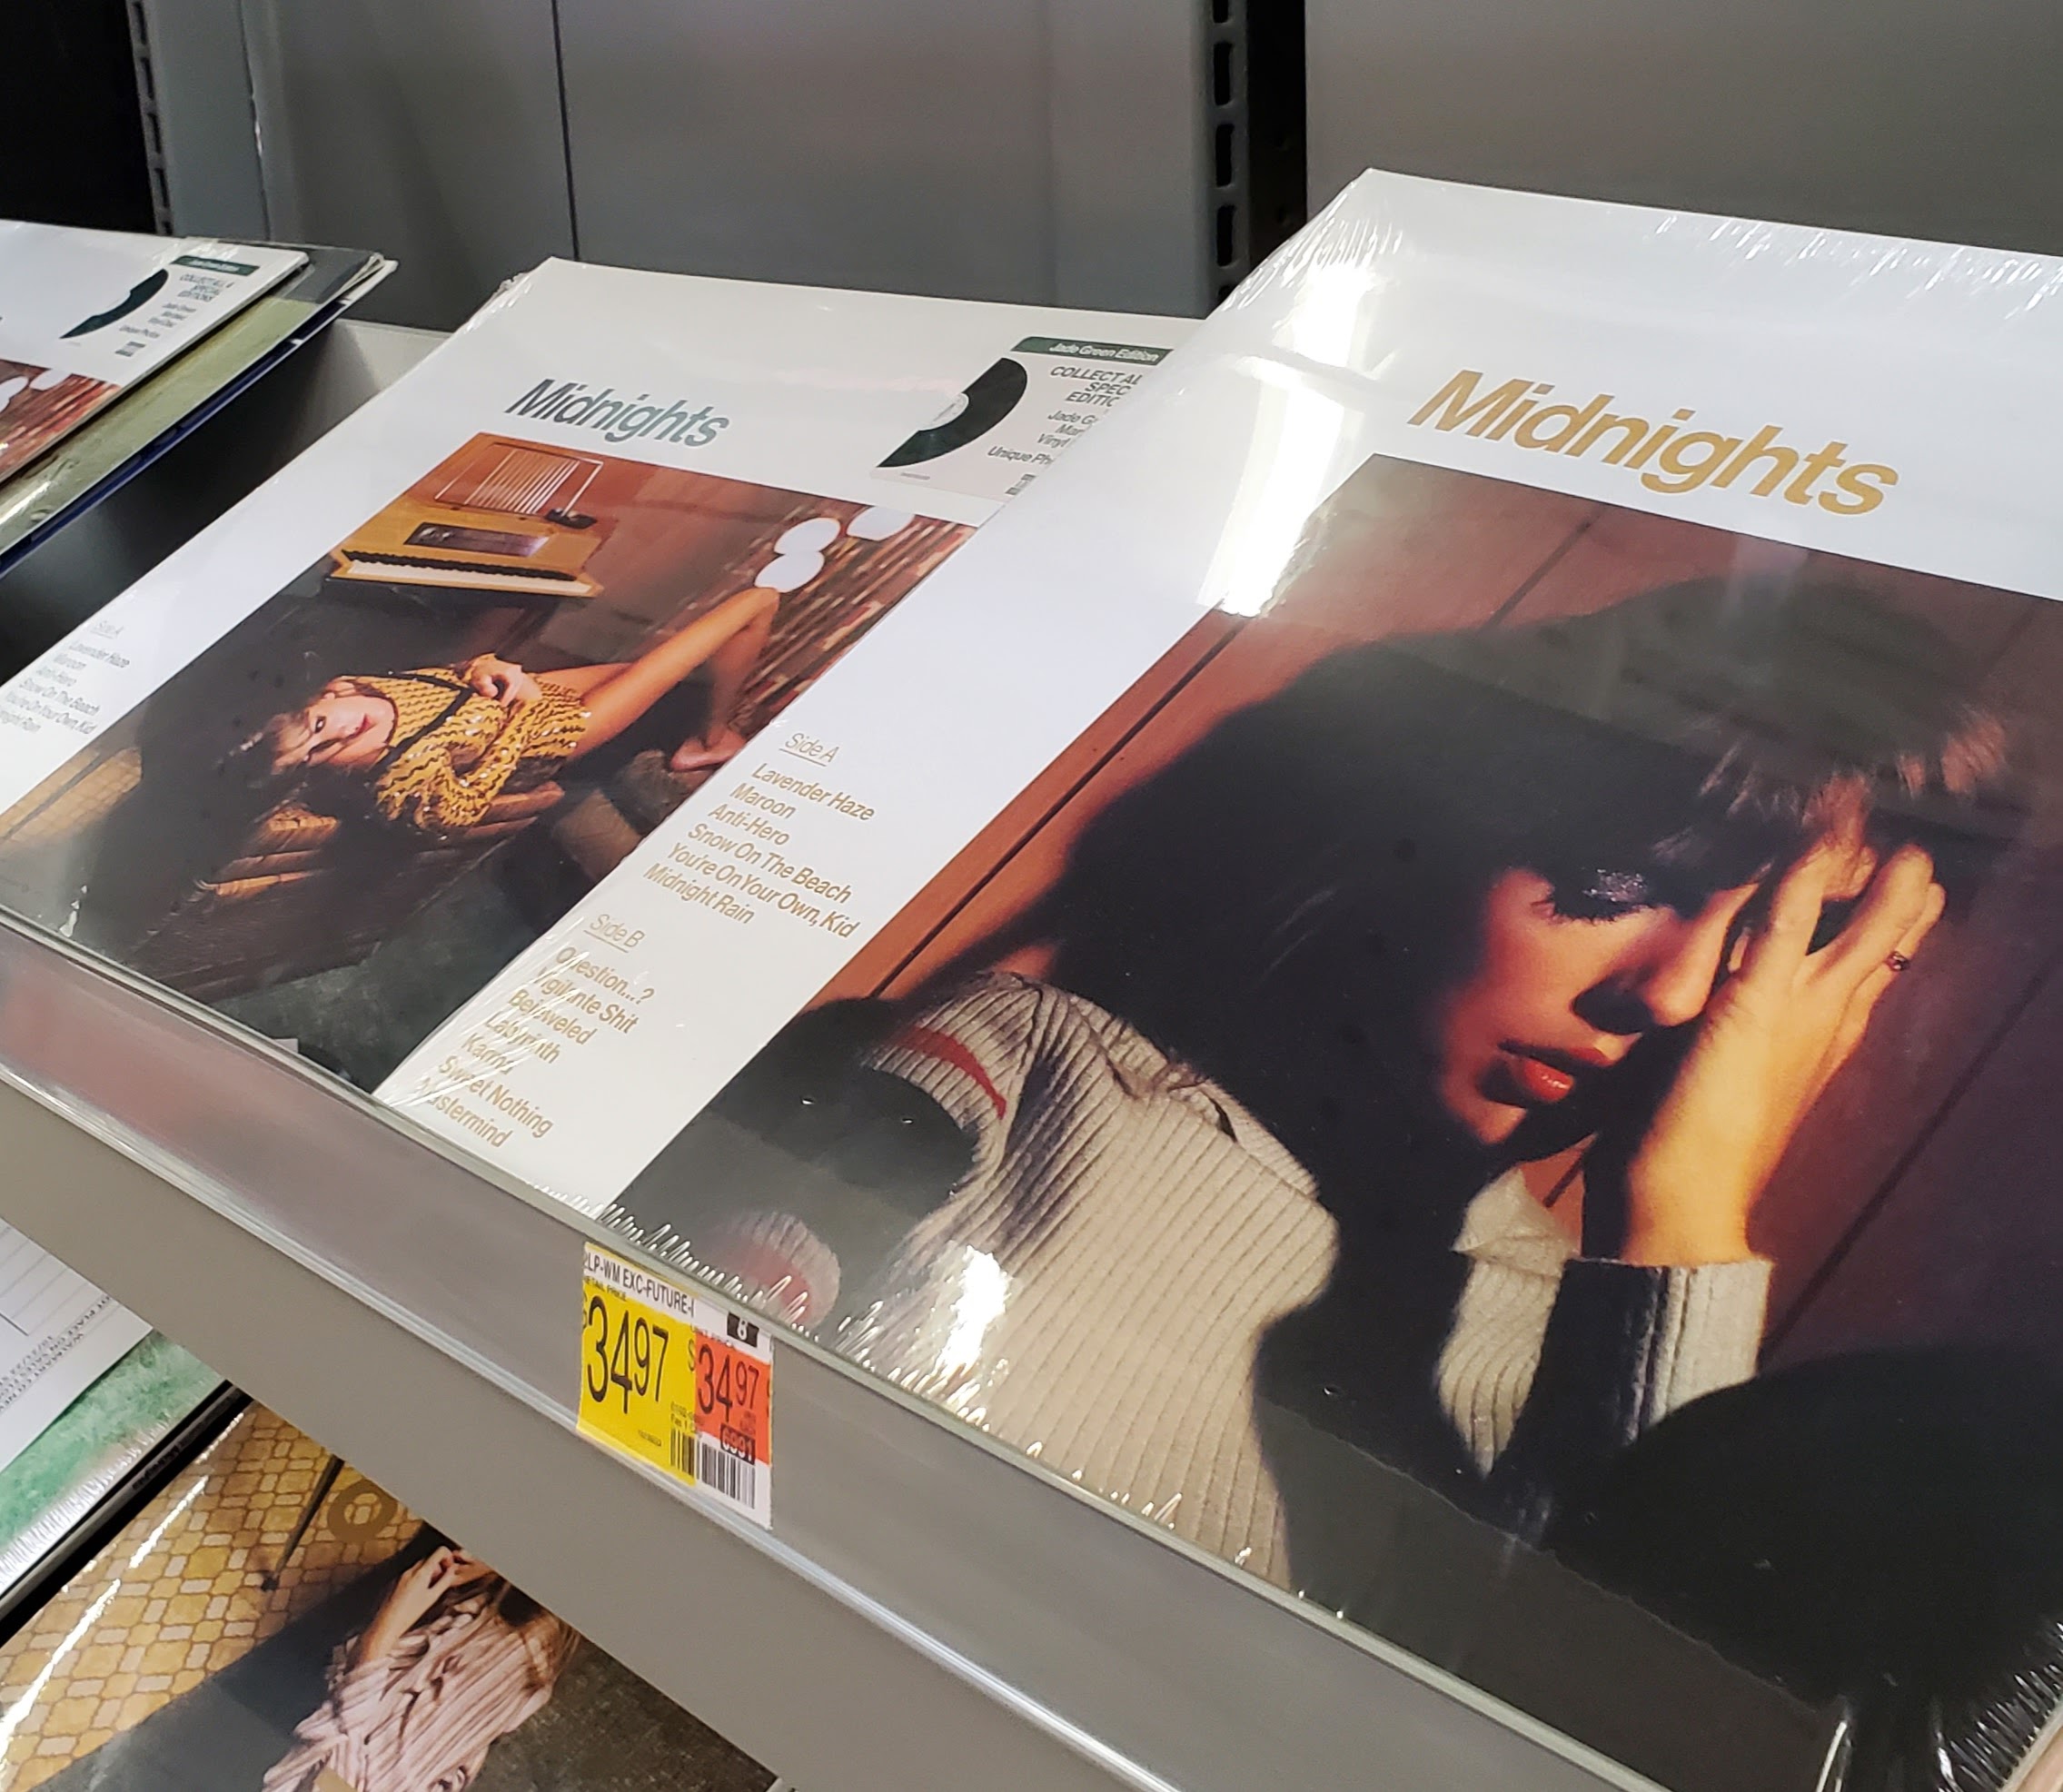  Different editions of Taylor Swift's Midnight vinyl albums on display